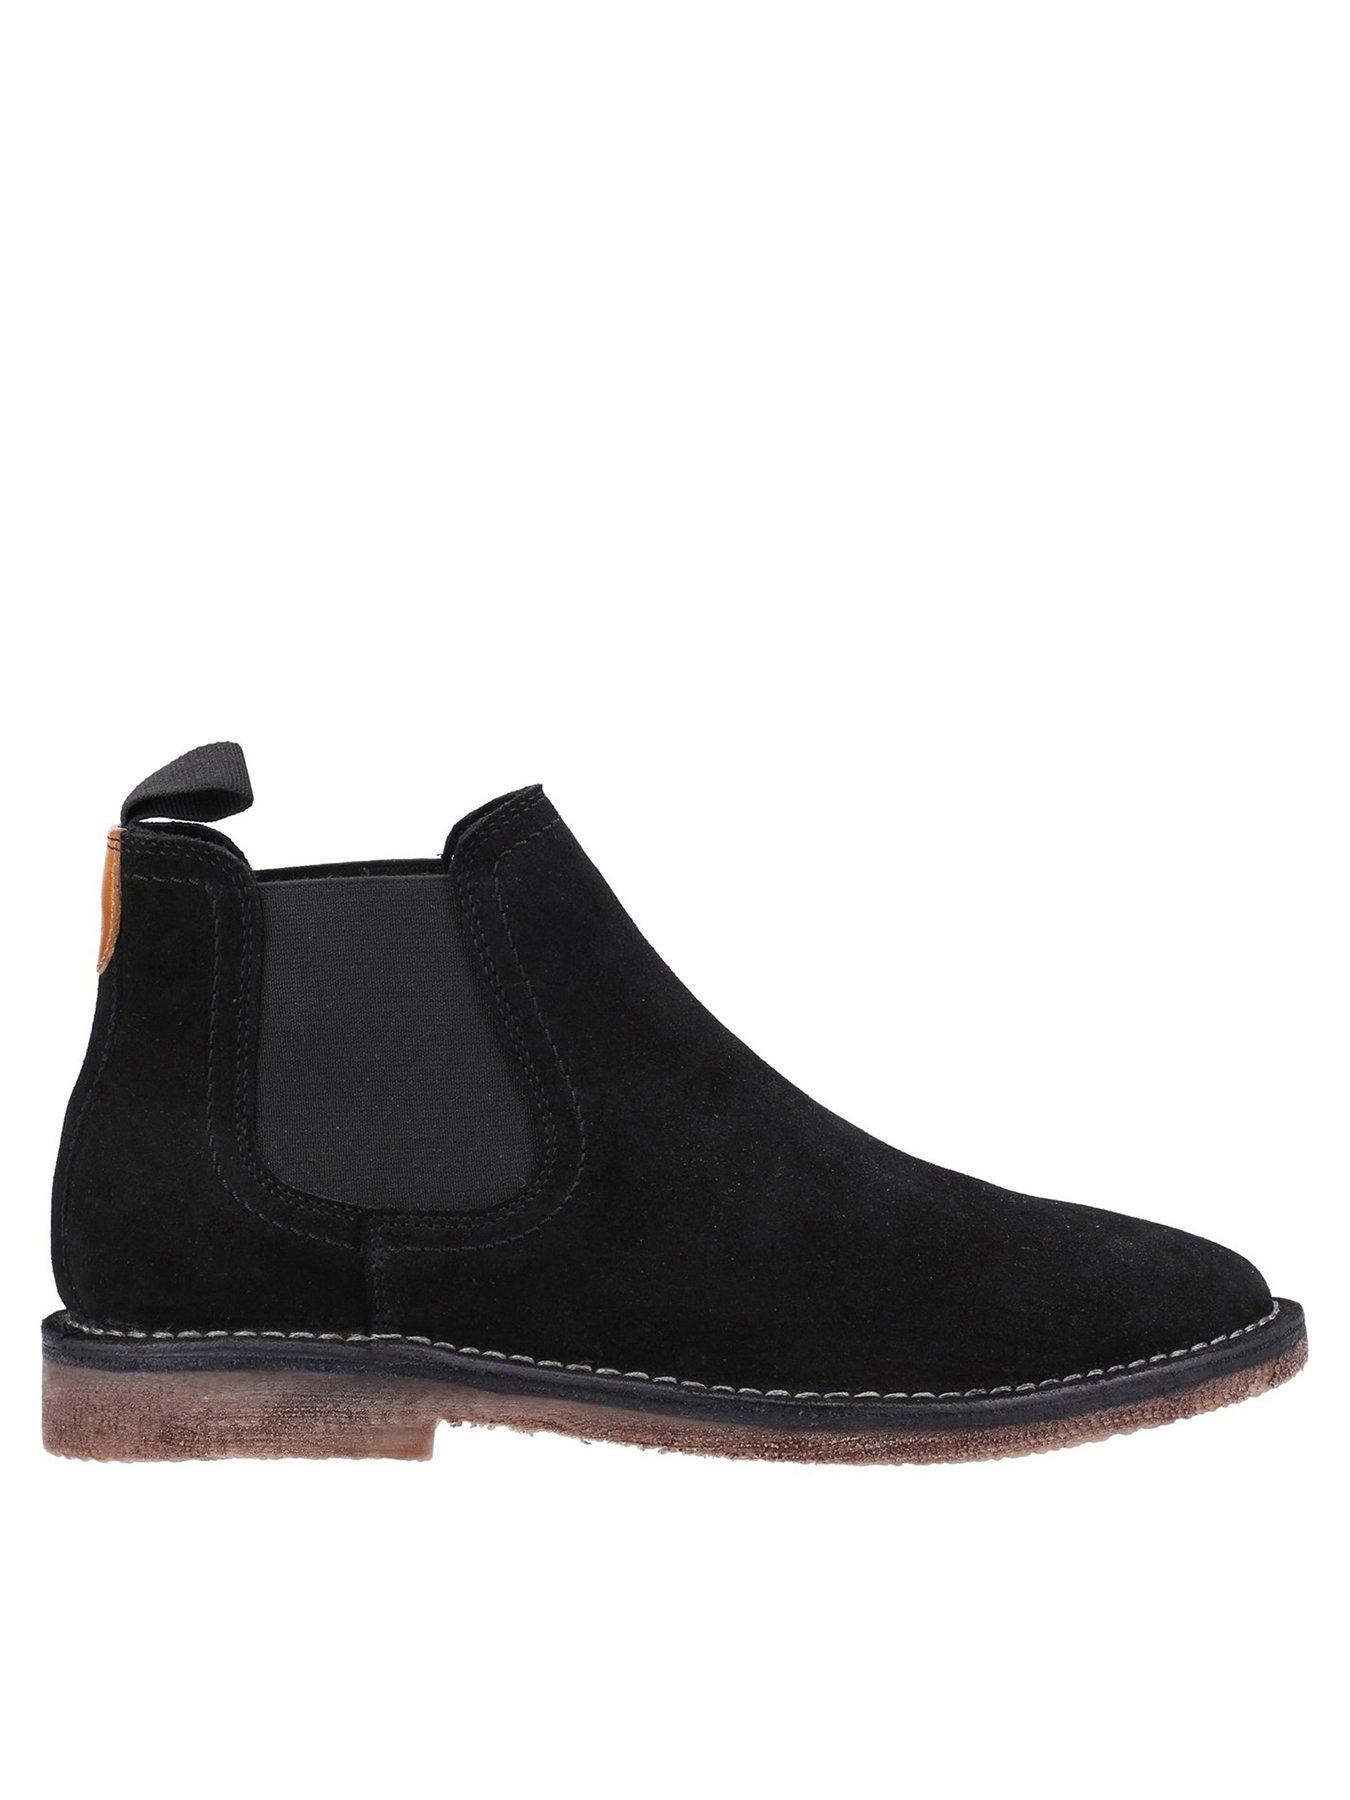 Hush Puppies Shaun Suede Chelsea Boots - Black | very.co.uk